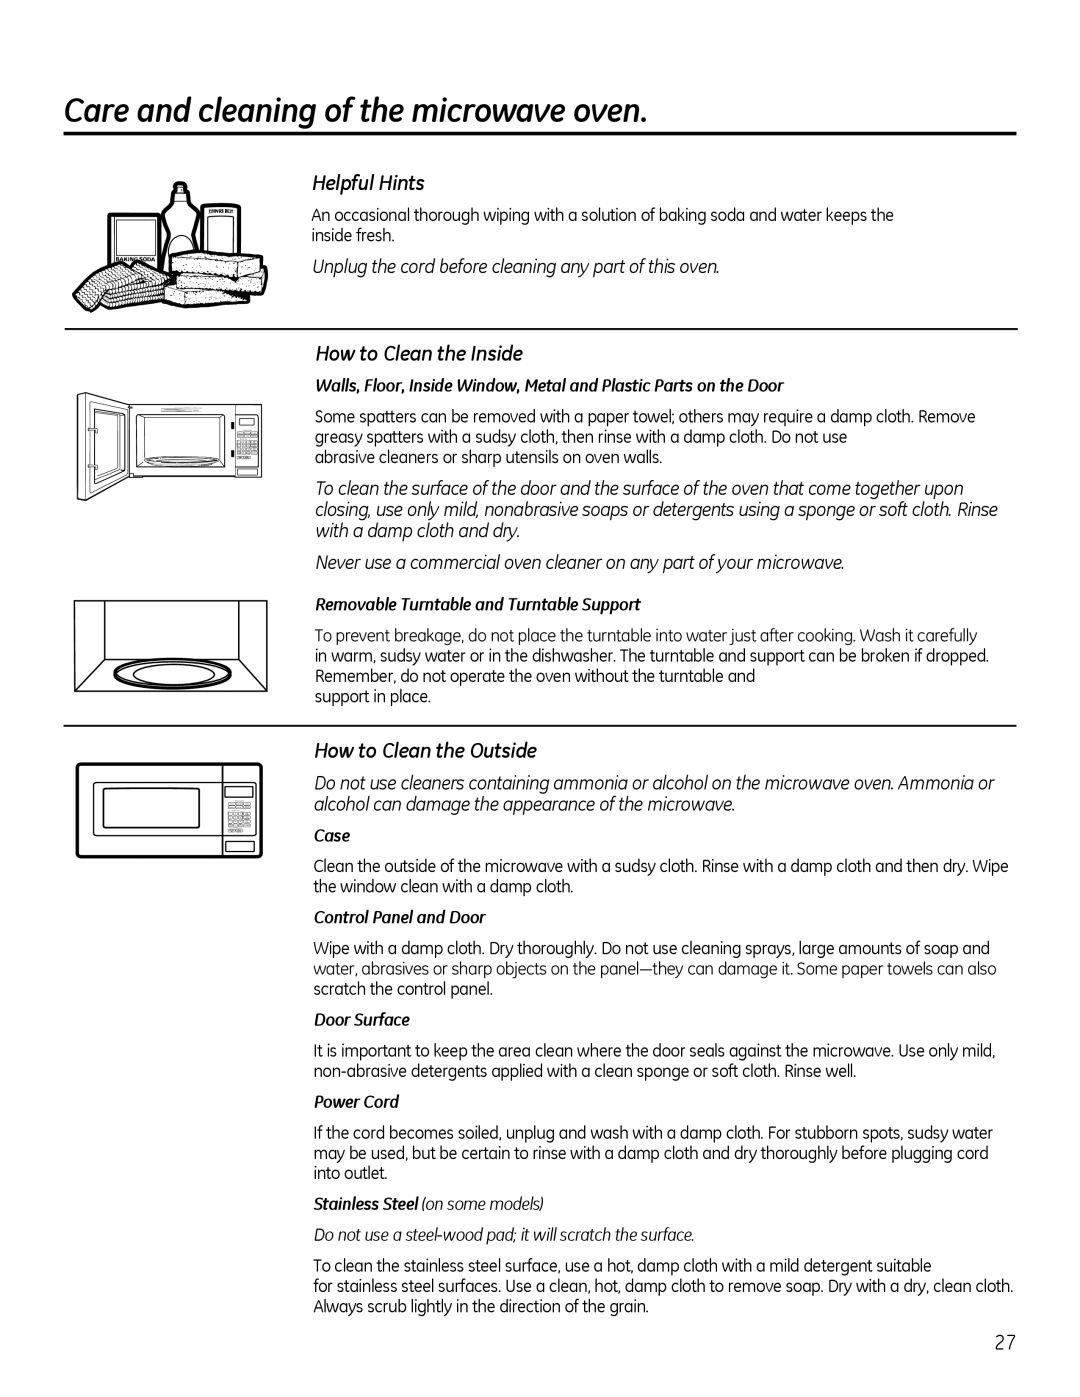 GE Microwave Oven owner manual Care and cleaning of the microwave oven, Helpful Hints, How to Clean the Inside 